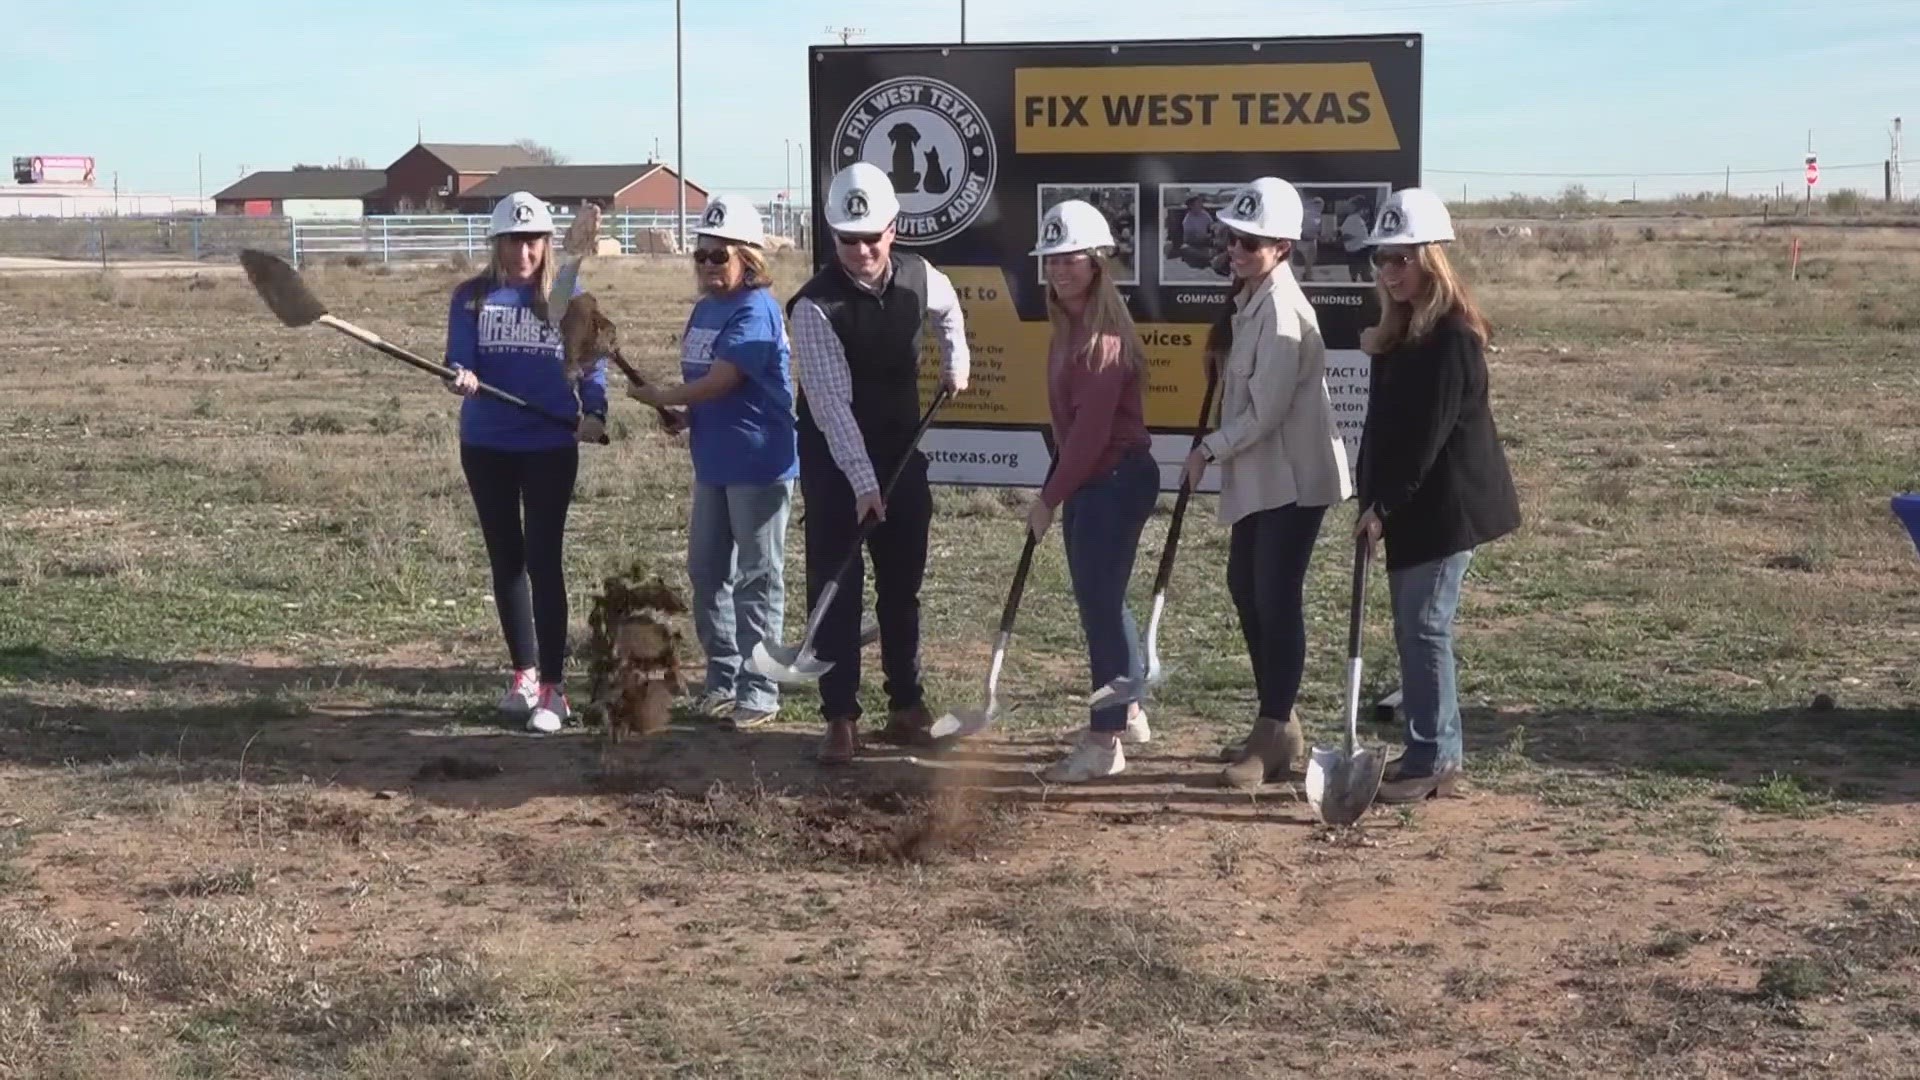 The new ground breaking location for Fix West Texas will be located behind Mid-Cities Church near Highway 191.